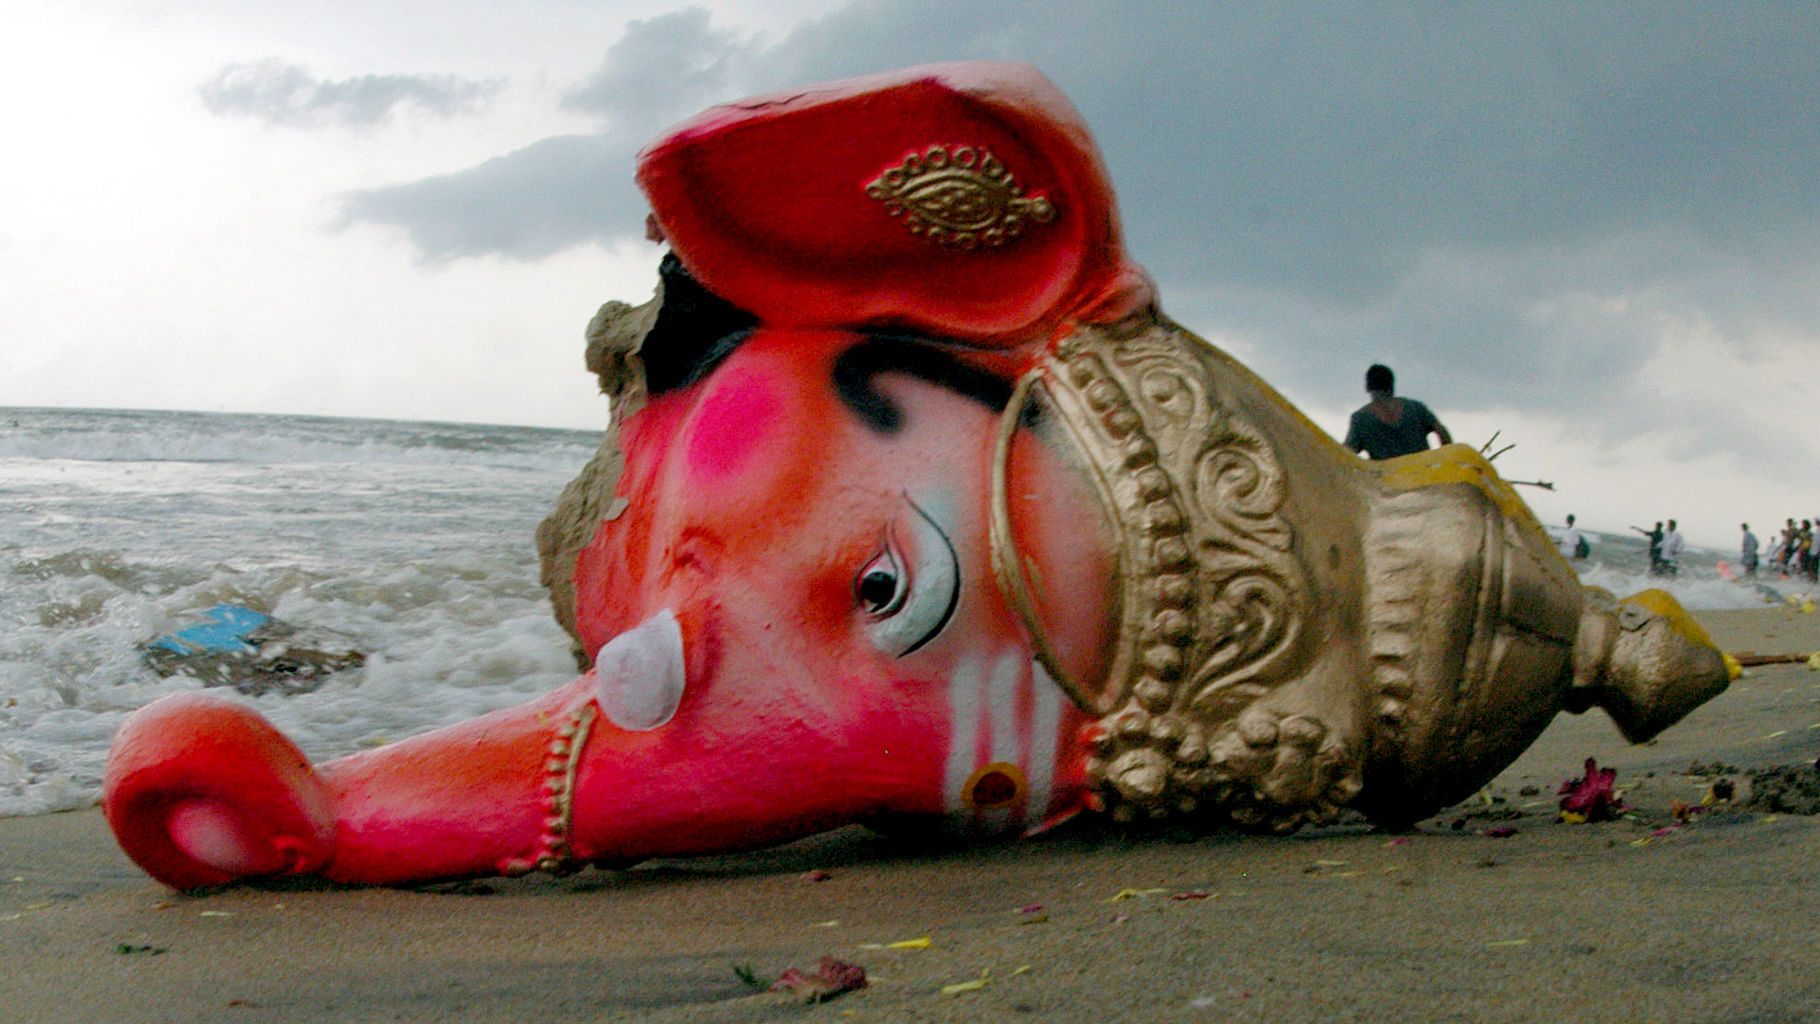 An idol of elephant-headed Hindu God Ganesh lies on a beach before its immersion in the sea during the ten-day Ganesh festival in the southern Indian city of Chennai, September 3, 2006. (Photo: Reuters)&nbsp;